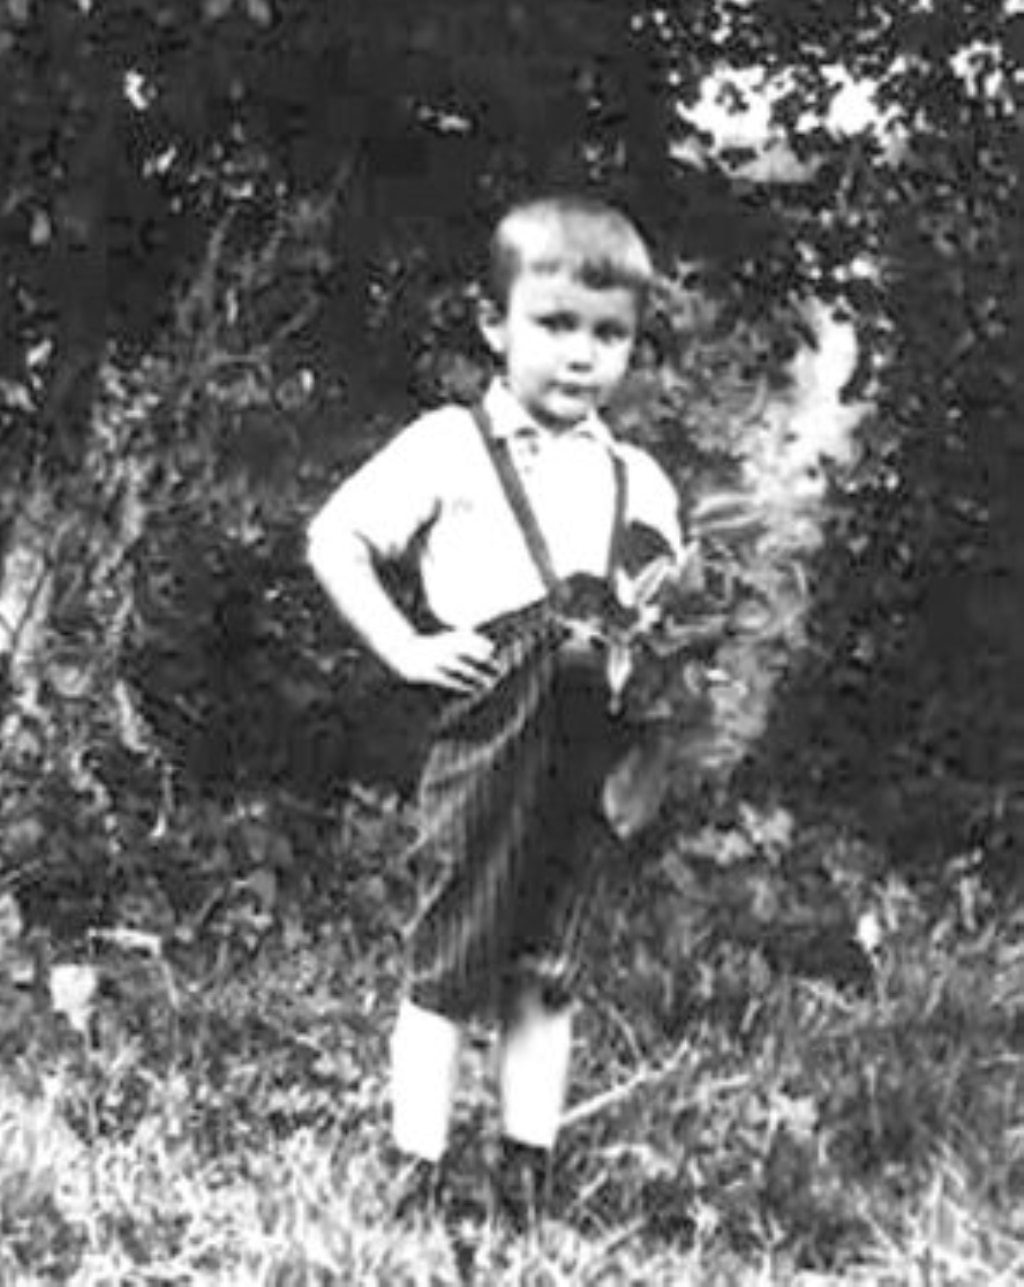 In an undated childhood photograph